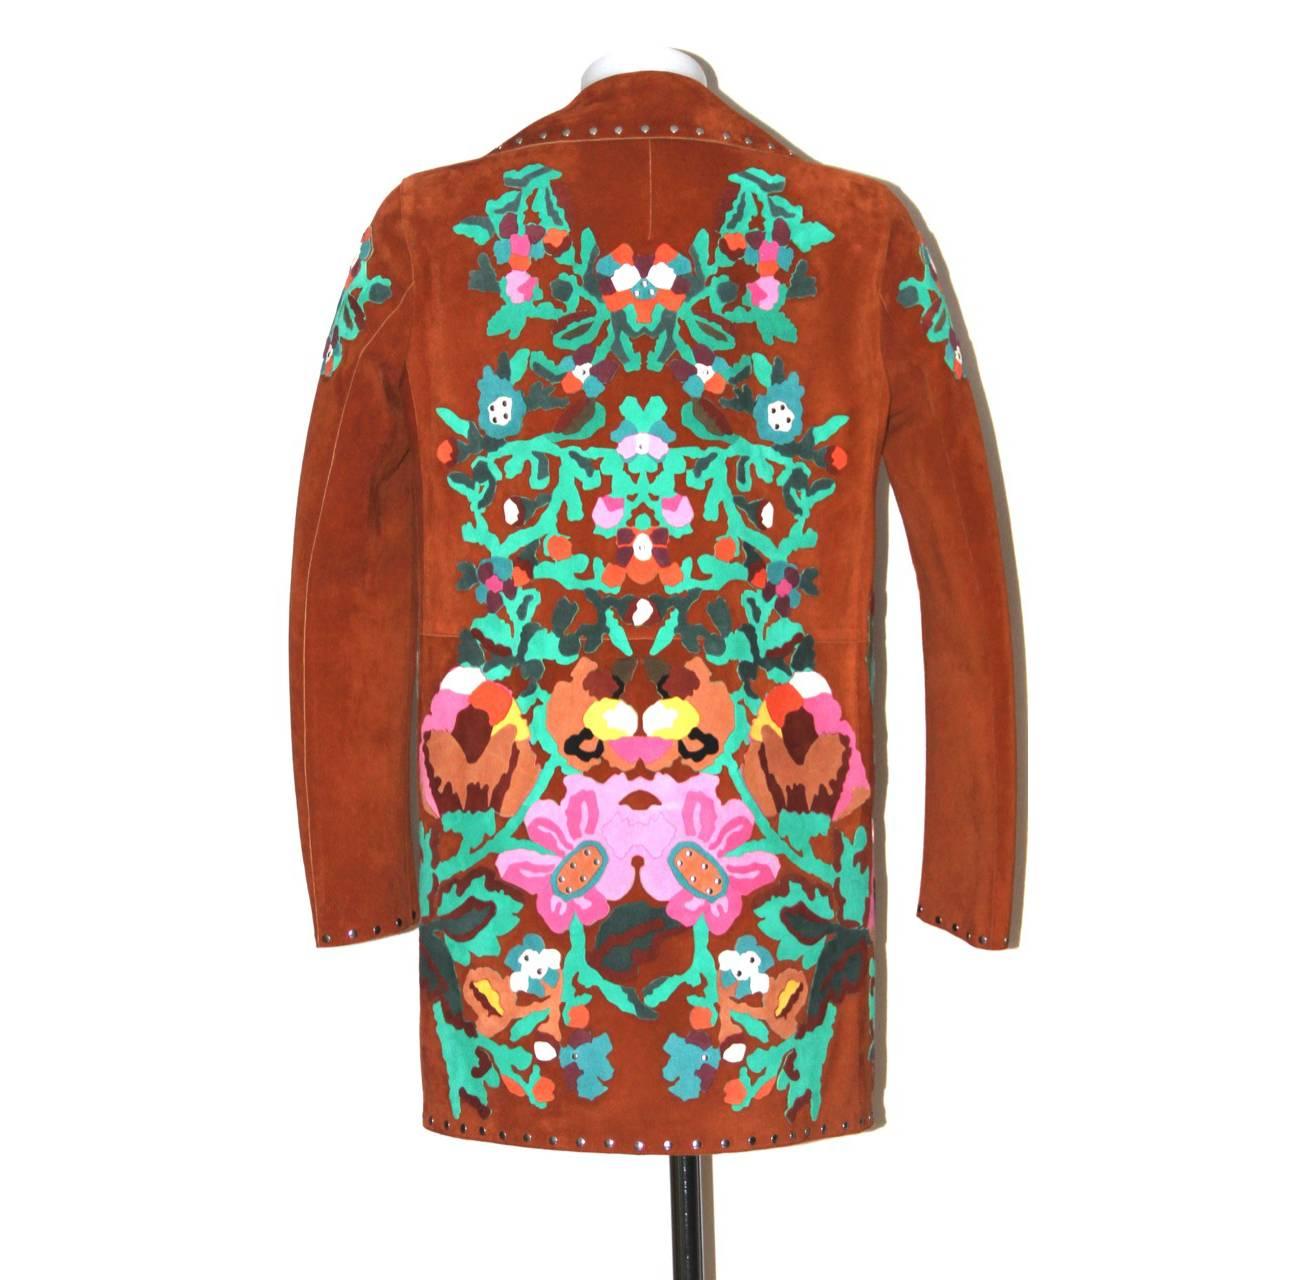 The exotic floral appliqué on Valentino's jacket are a nod to Mexican folk art.
This sophisticated, graphic style is crafted of camel suede and punctuated with silver studs. 

Collection: Resort 2015
Fabric: Suede 
Color: Camel
Size: IT 40